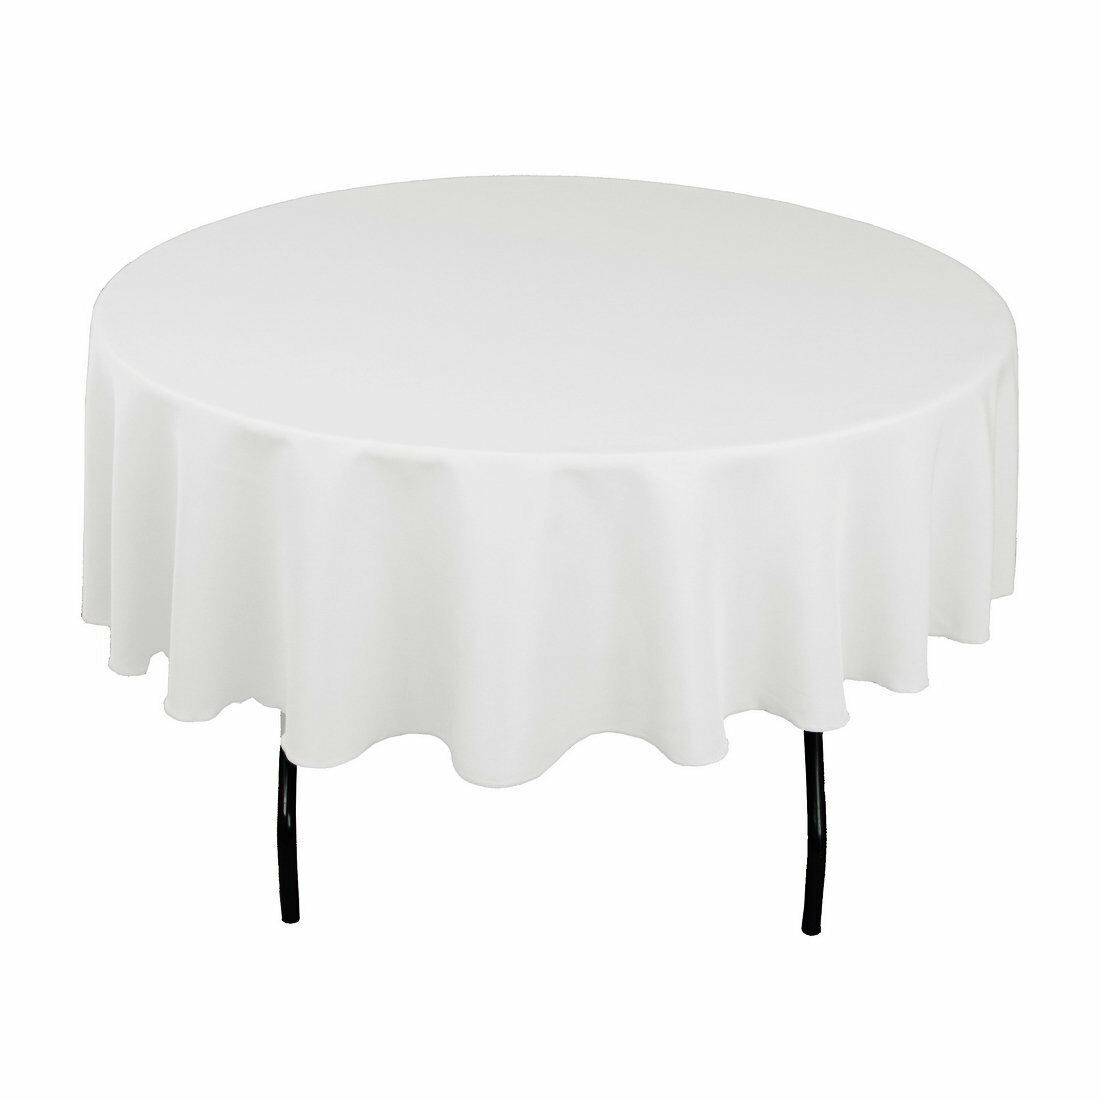 70" Round Seamless Tablecloth For Wedding Party Banquet 30" 36" 48" 60" Tables